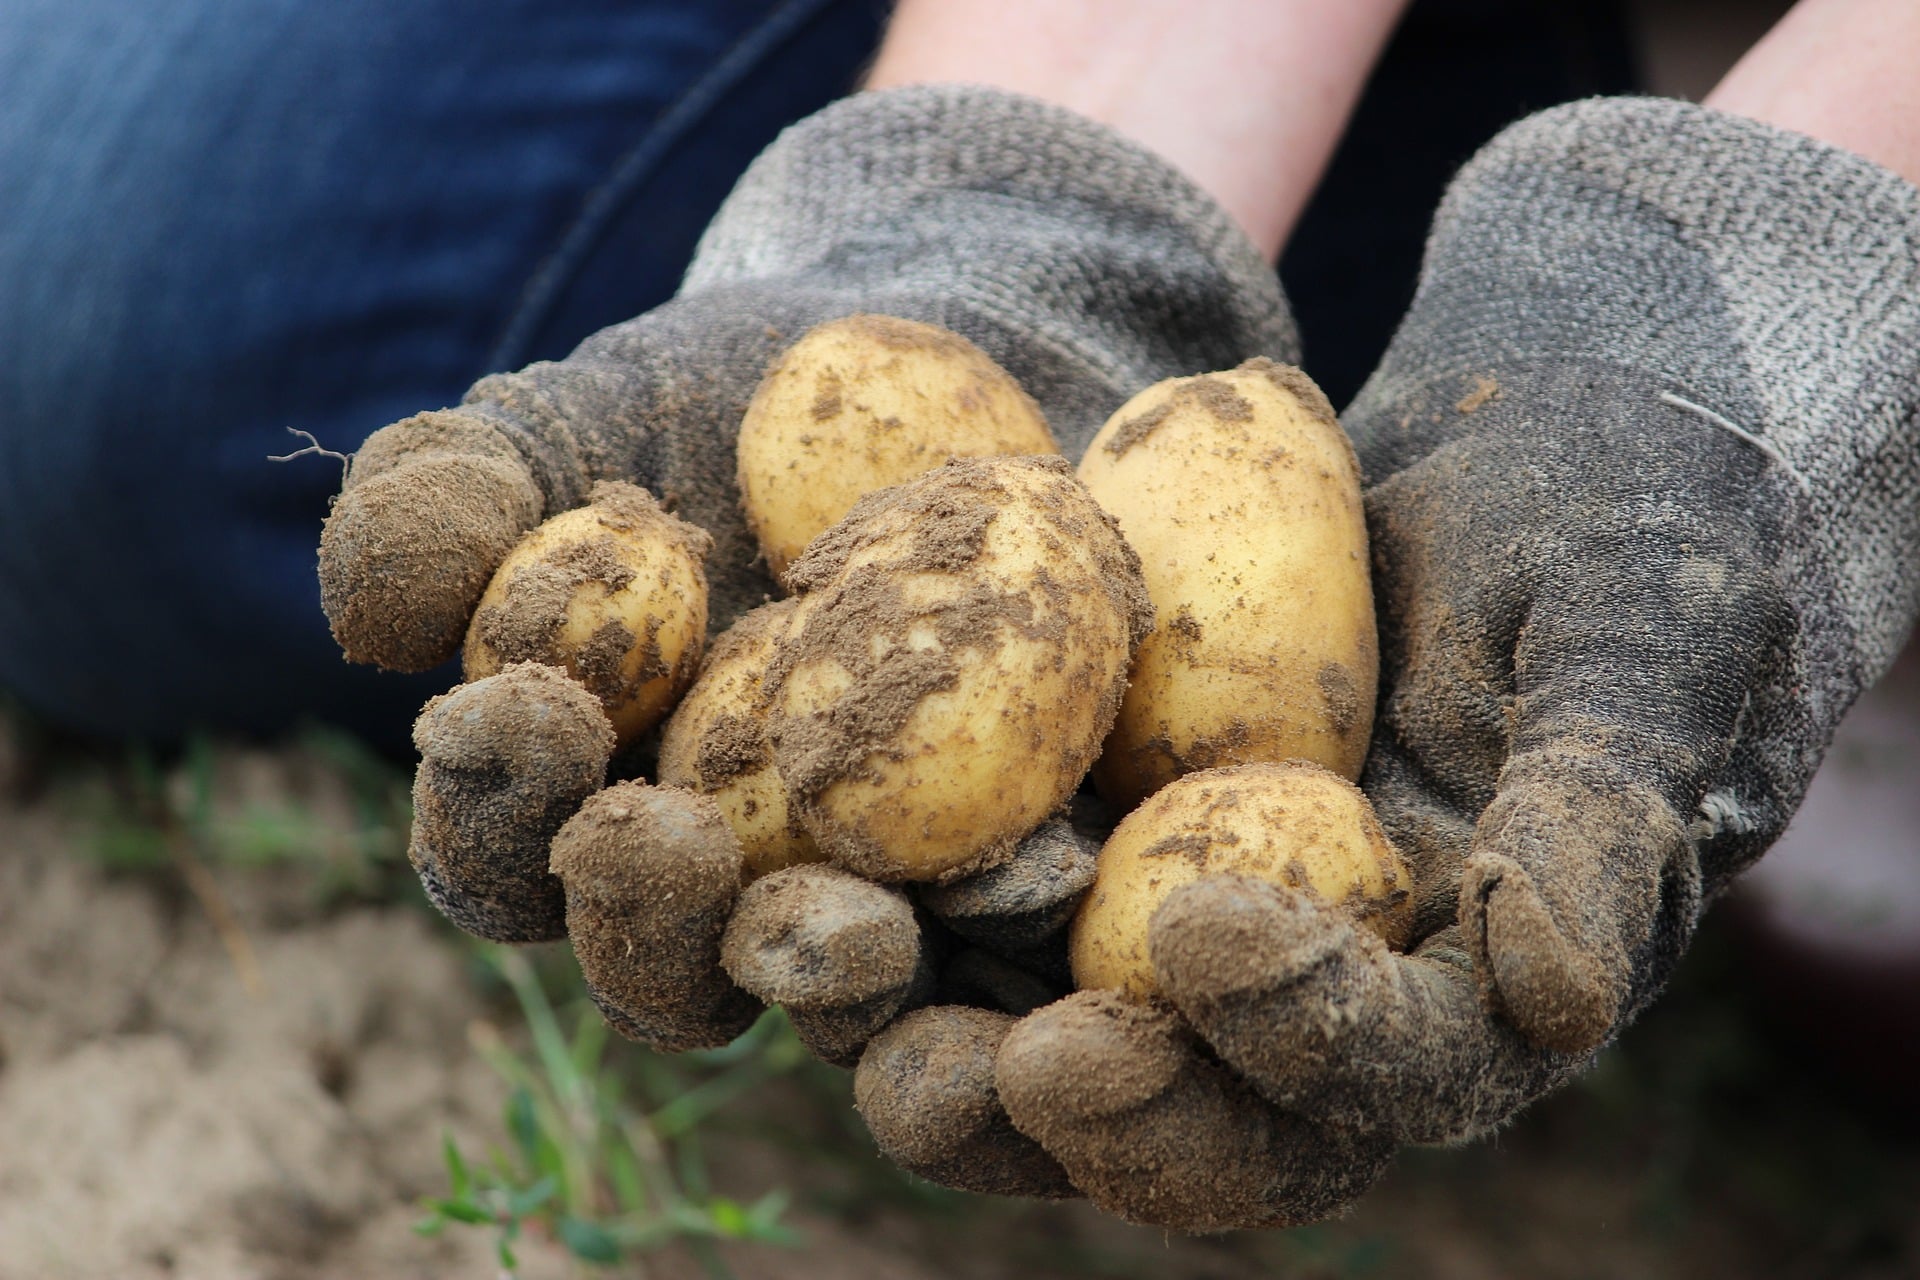 homegrown potatoes - nesting in gloved hands